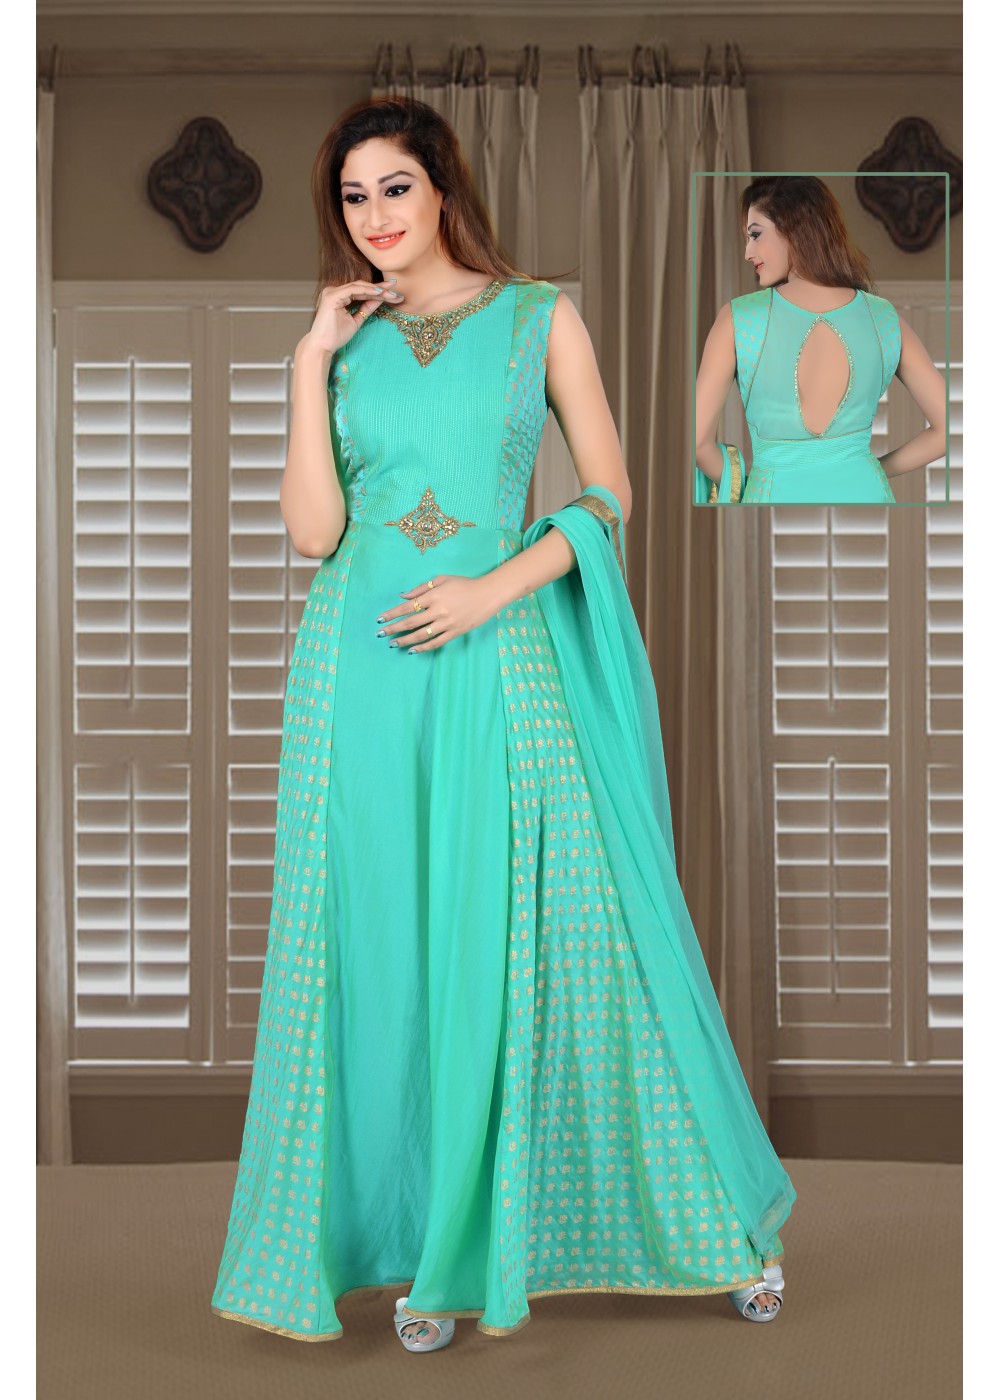 BOTTLE GREEN DRAPED GOWN SET WITH AN EMBROIDERED BODICE AND A 3D SHOULDER  DETAIL - Seasons India